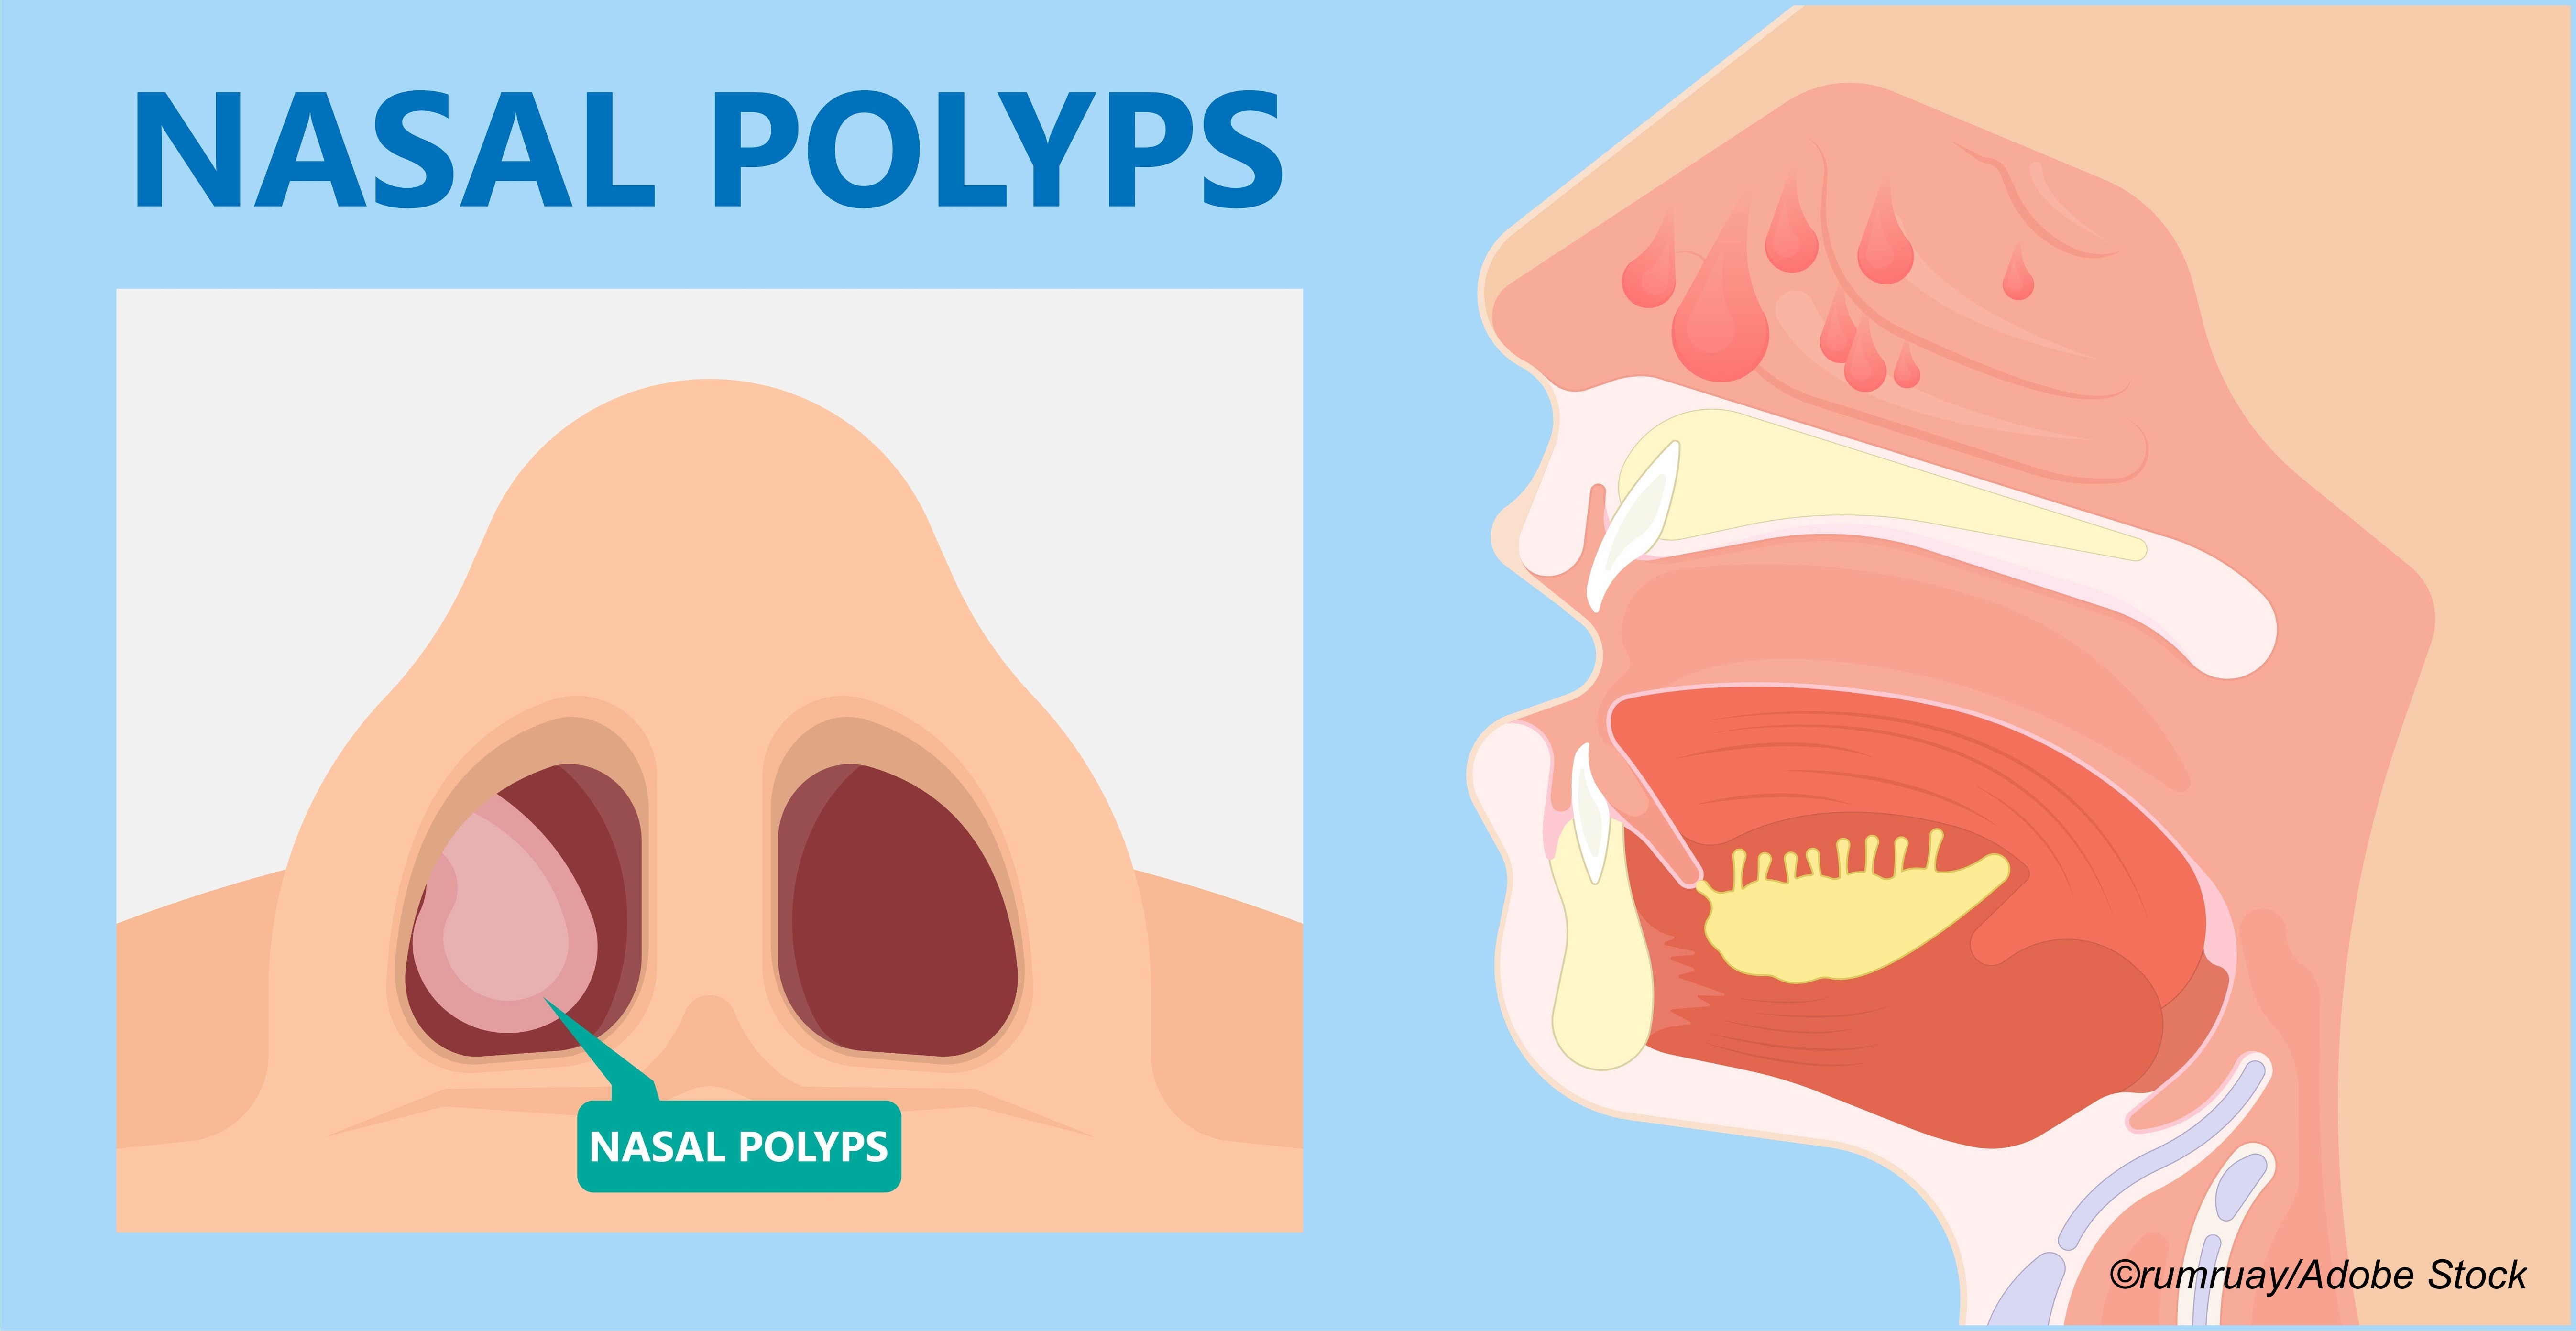 ERS: Biologic Shows Efficacy in Asthma Patients with Nasal Polyps